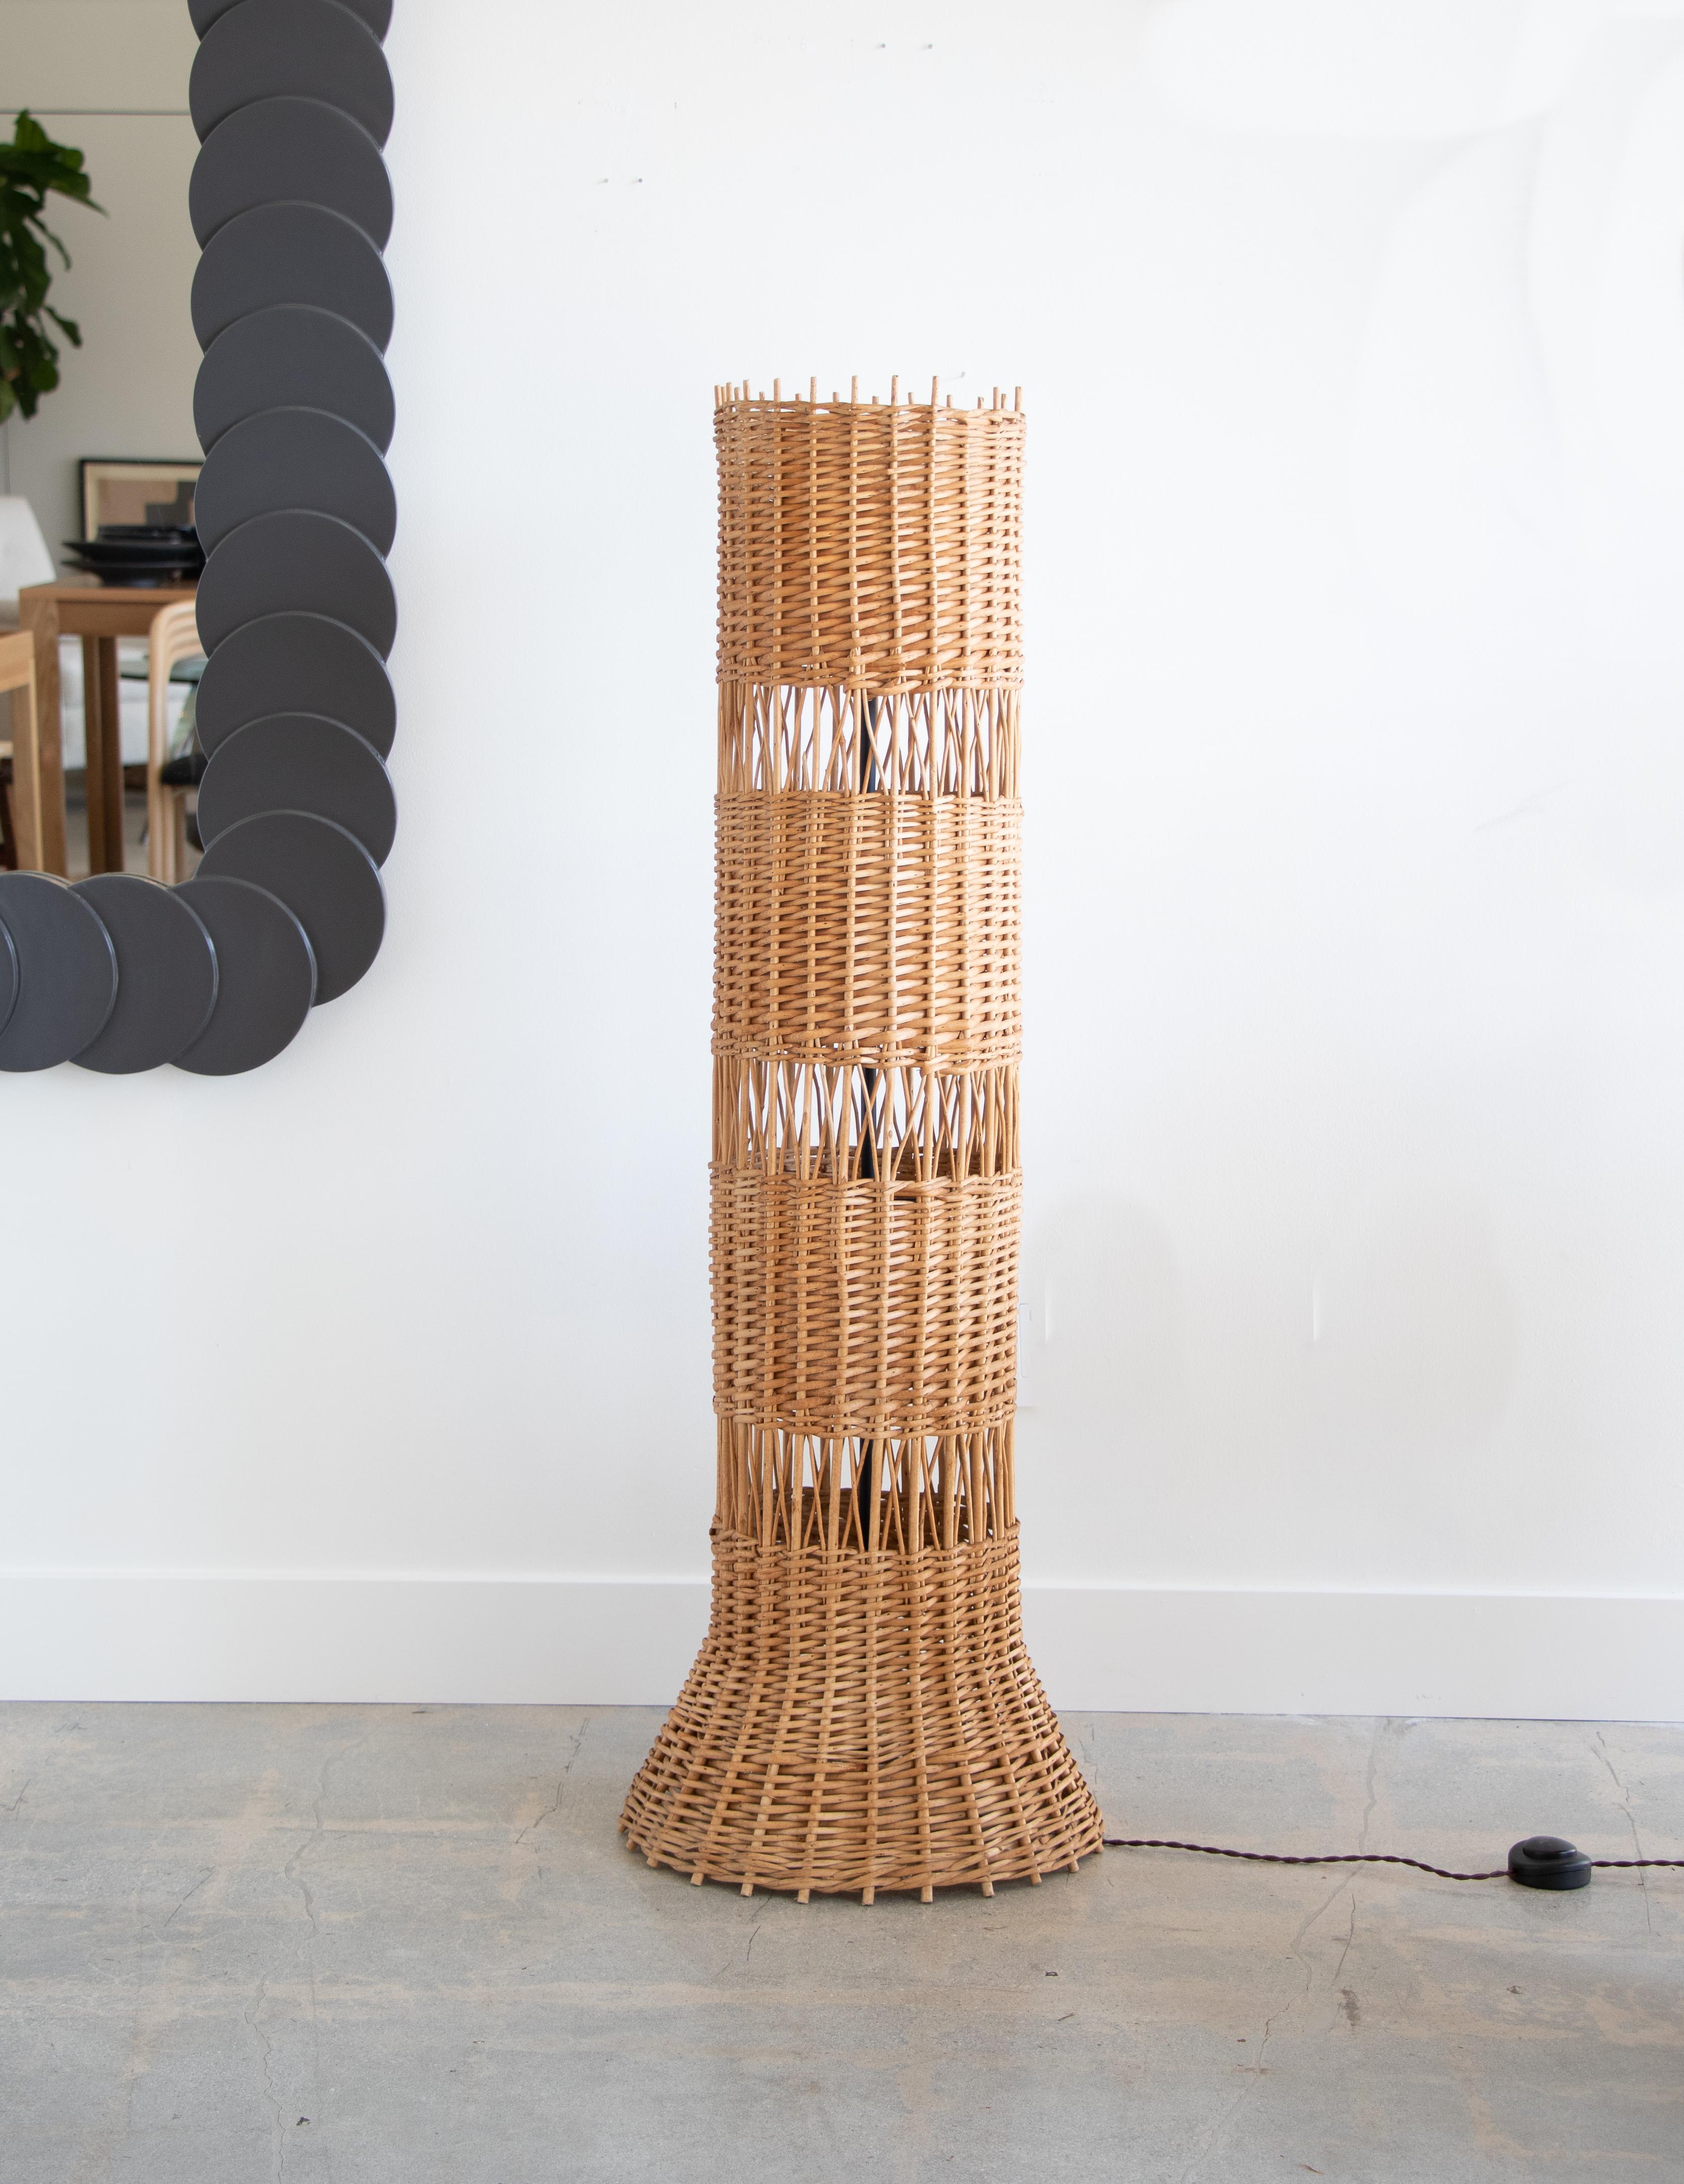 Unique French wicker standing floor lamp in a column shape that measures nearly 4 feet tall. Beautiful woven wicker detail with openings to let the light shine through. Newly made interior black iron stand holds 3 sockets with new wiring. Wicker